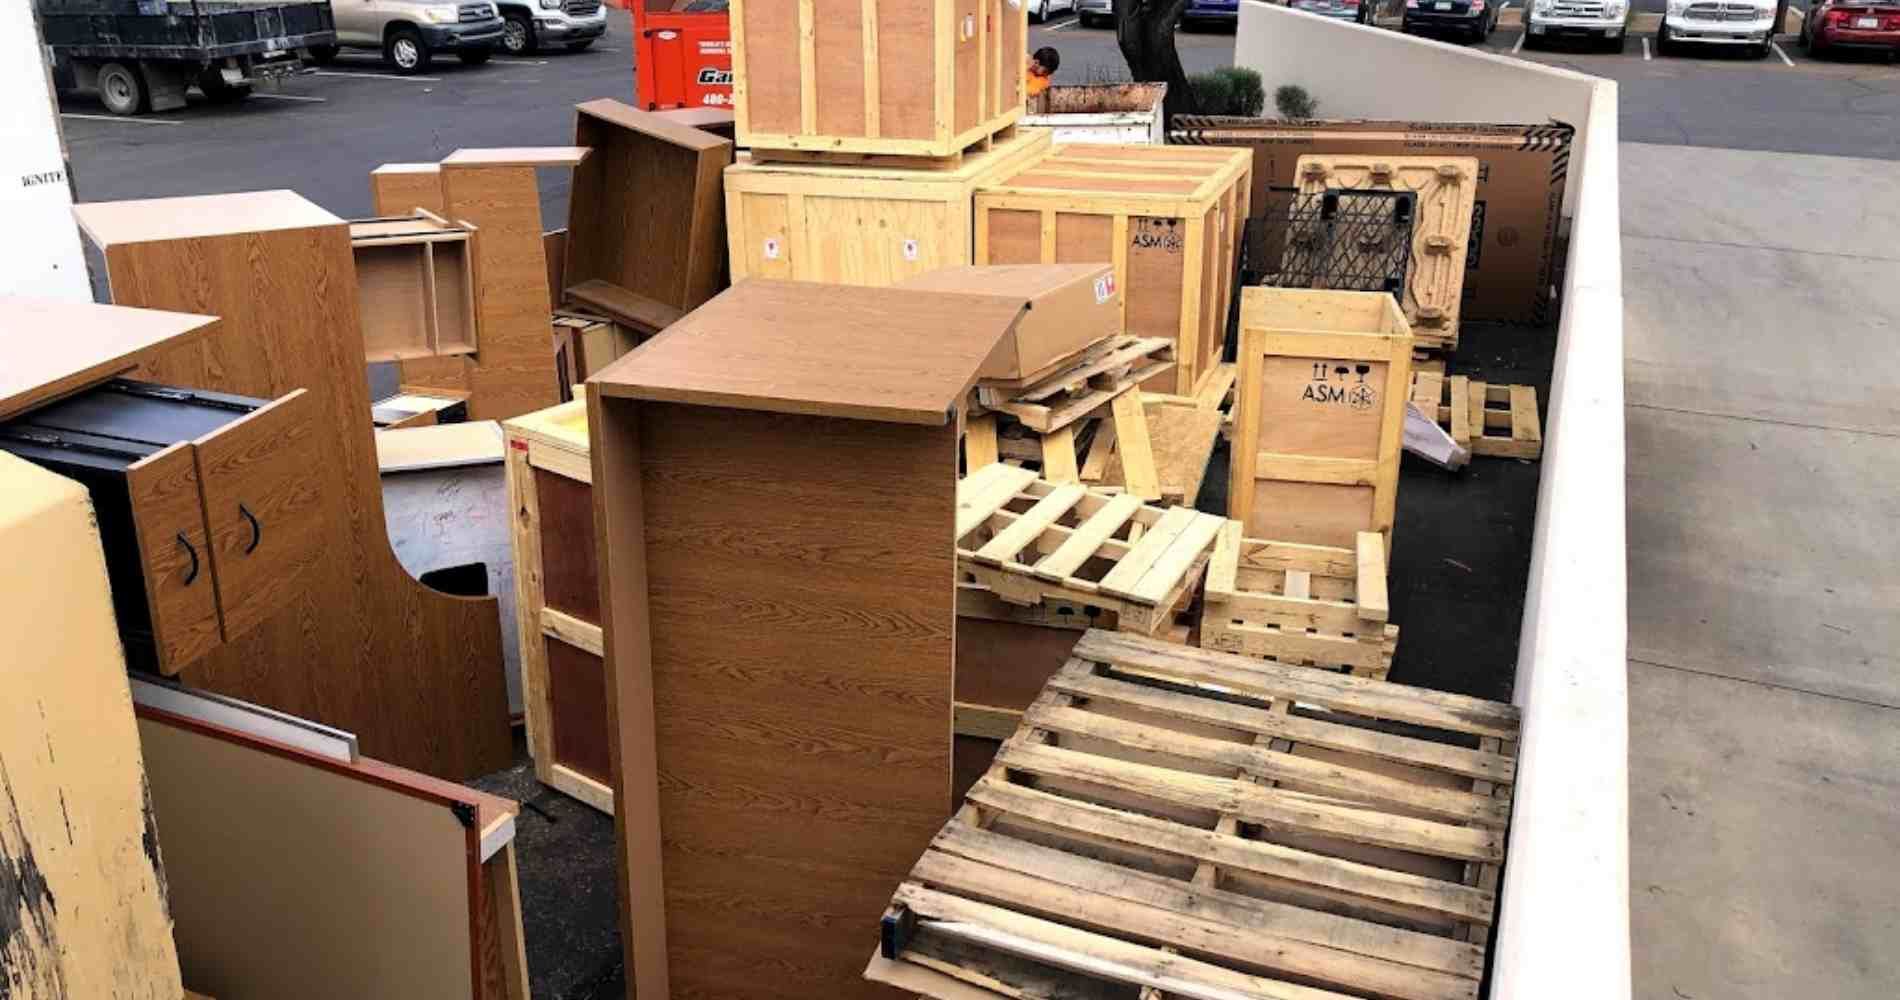 #1 for Pallet Disposal in Florence, AZ With Over 1200 5-Star Reviews!